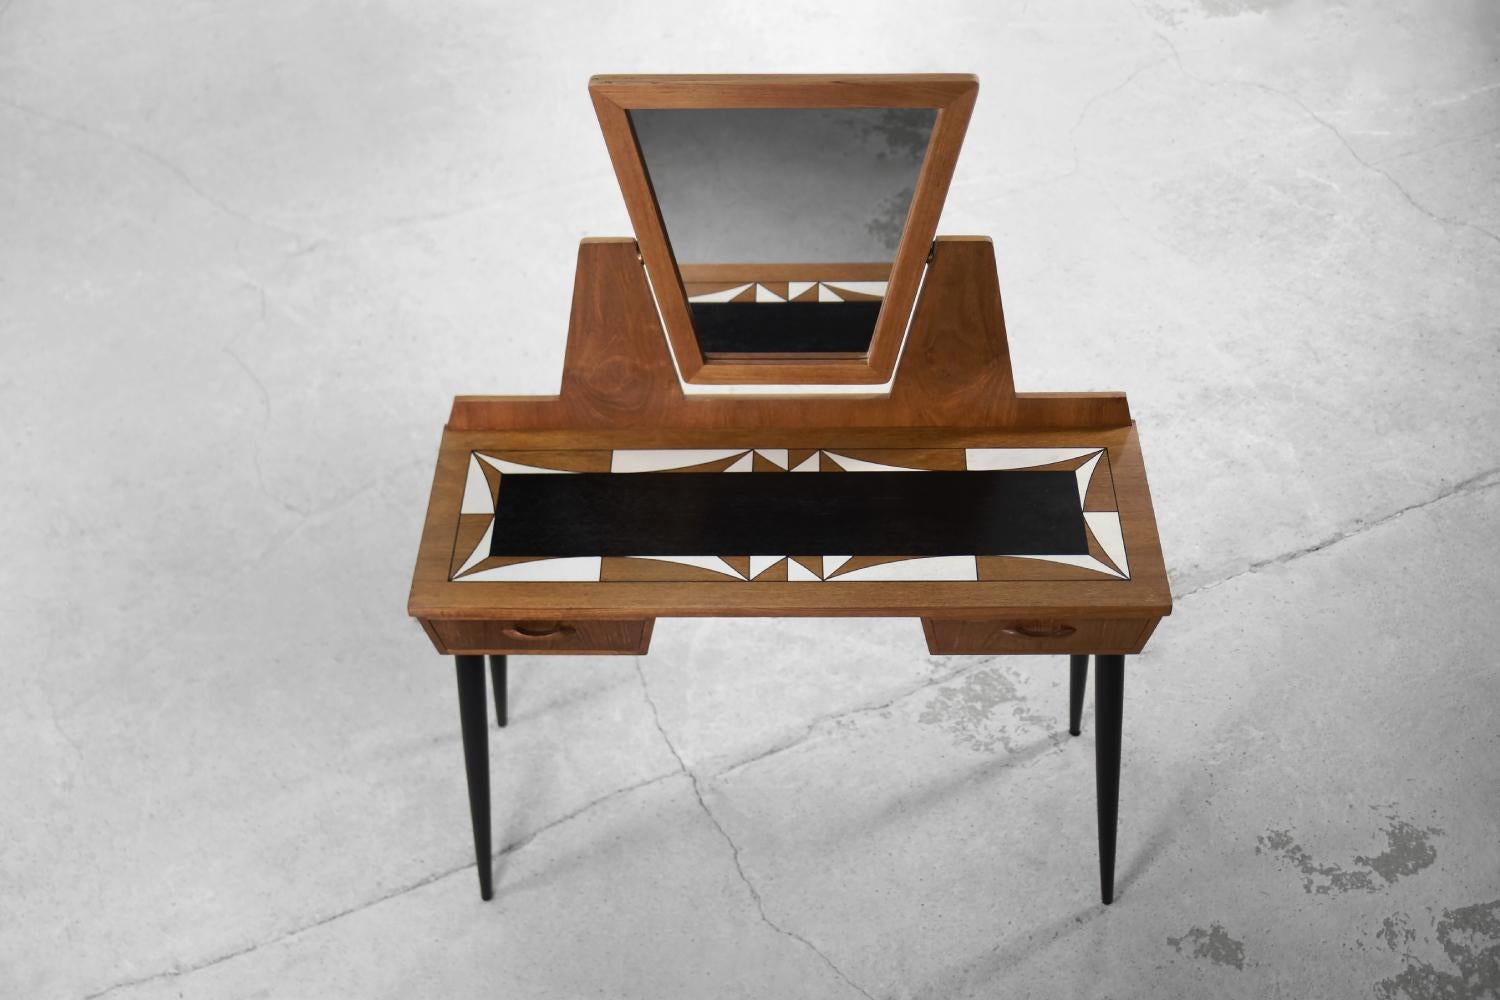 The modernist dressing table with a mirror was made in Scandinavia during the 1960s. It is finished with teak wood in a warm shade of brown. It has two drawers. A mirror is in a geometric frame, the angle of which can be freely adjusted. The